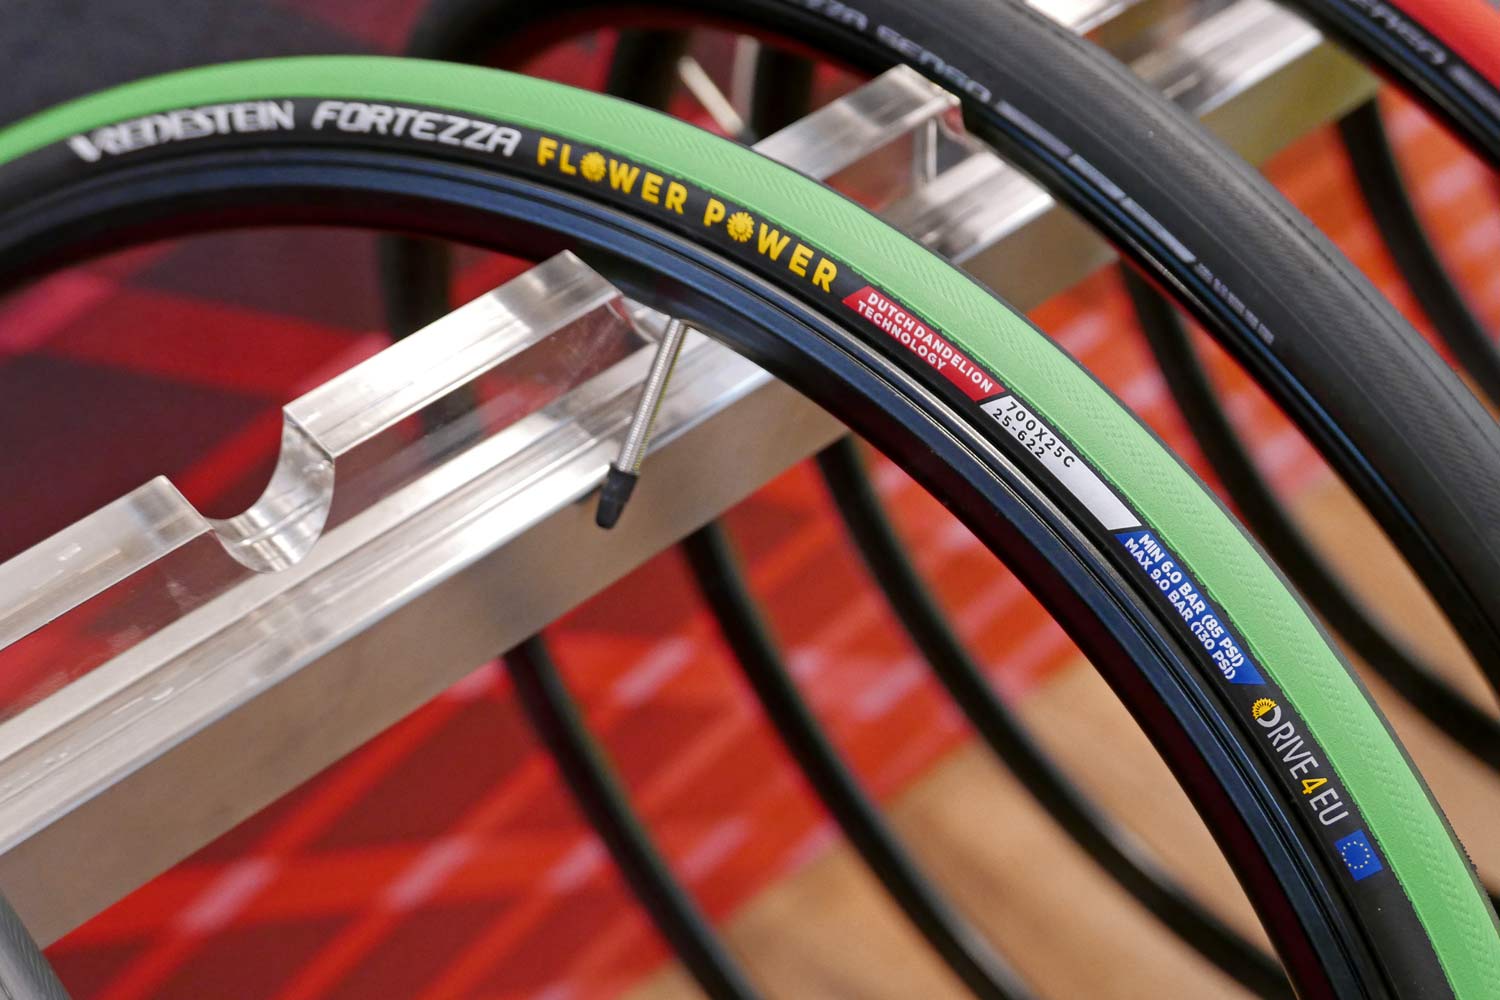 EB17: 5 new Vredestein Fortezza road tires get faster, tubeless & made of dandelions